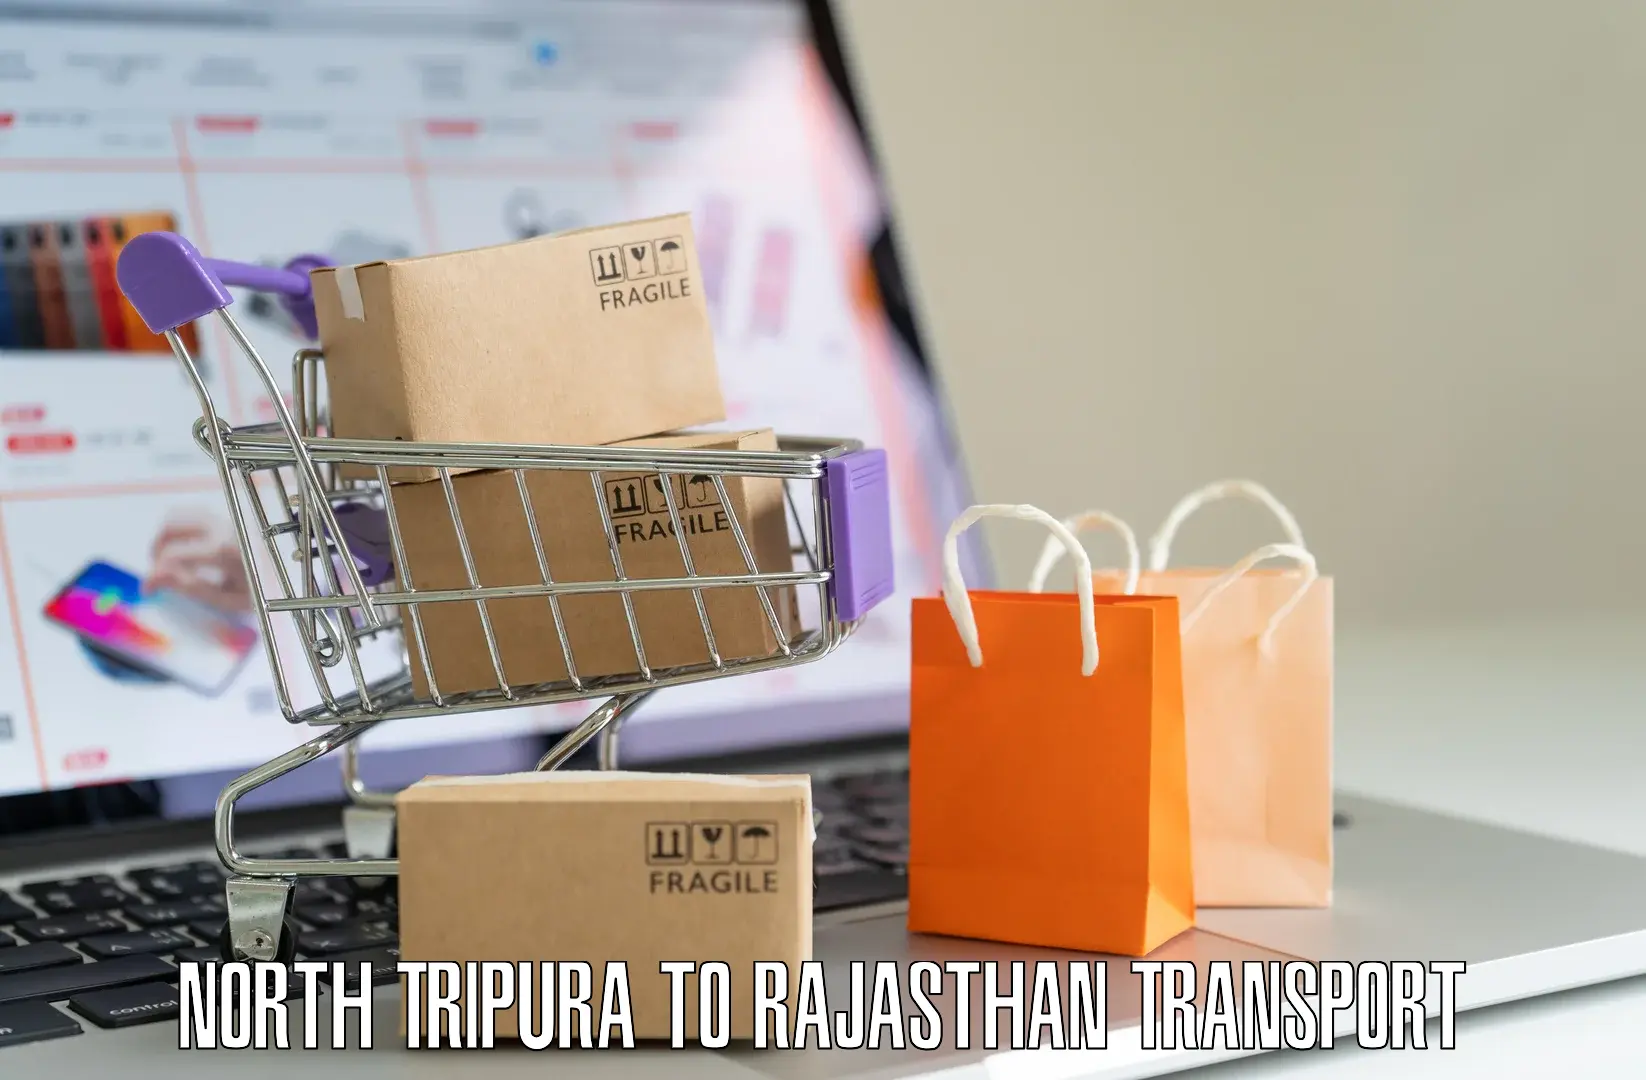 Nationwide transport services North Tripura to Sultana